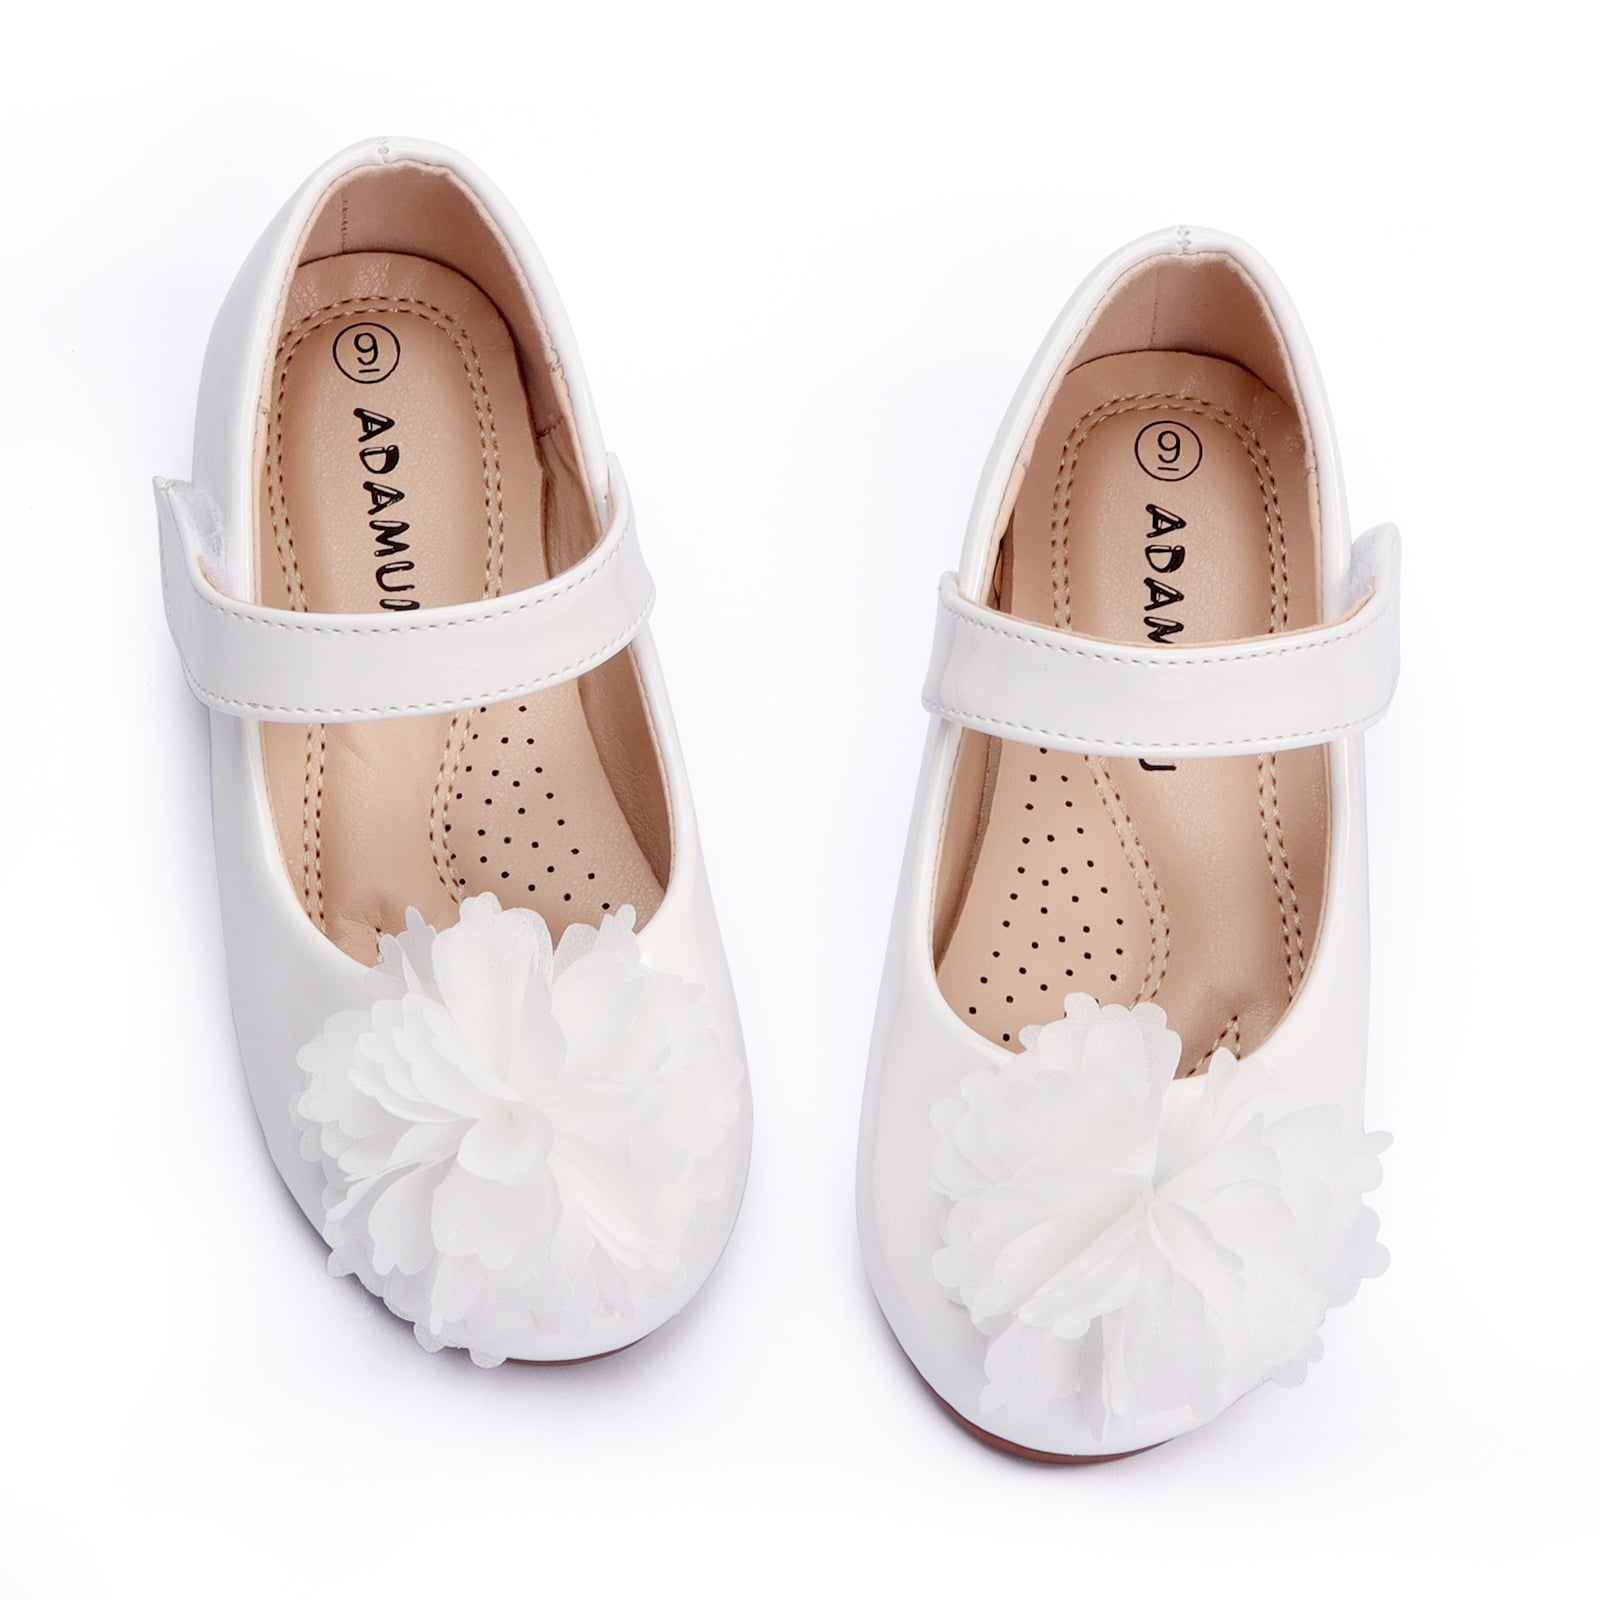 ADAMUMU Grils Dress Shoes Flower Girl Shoes for Weeding Cute Toddler Mary Jane Shoes Casual Lace Flore Ballet Flat and 12 Sizes 